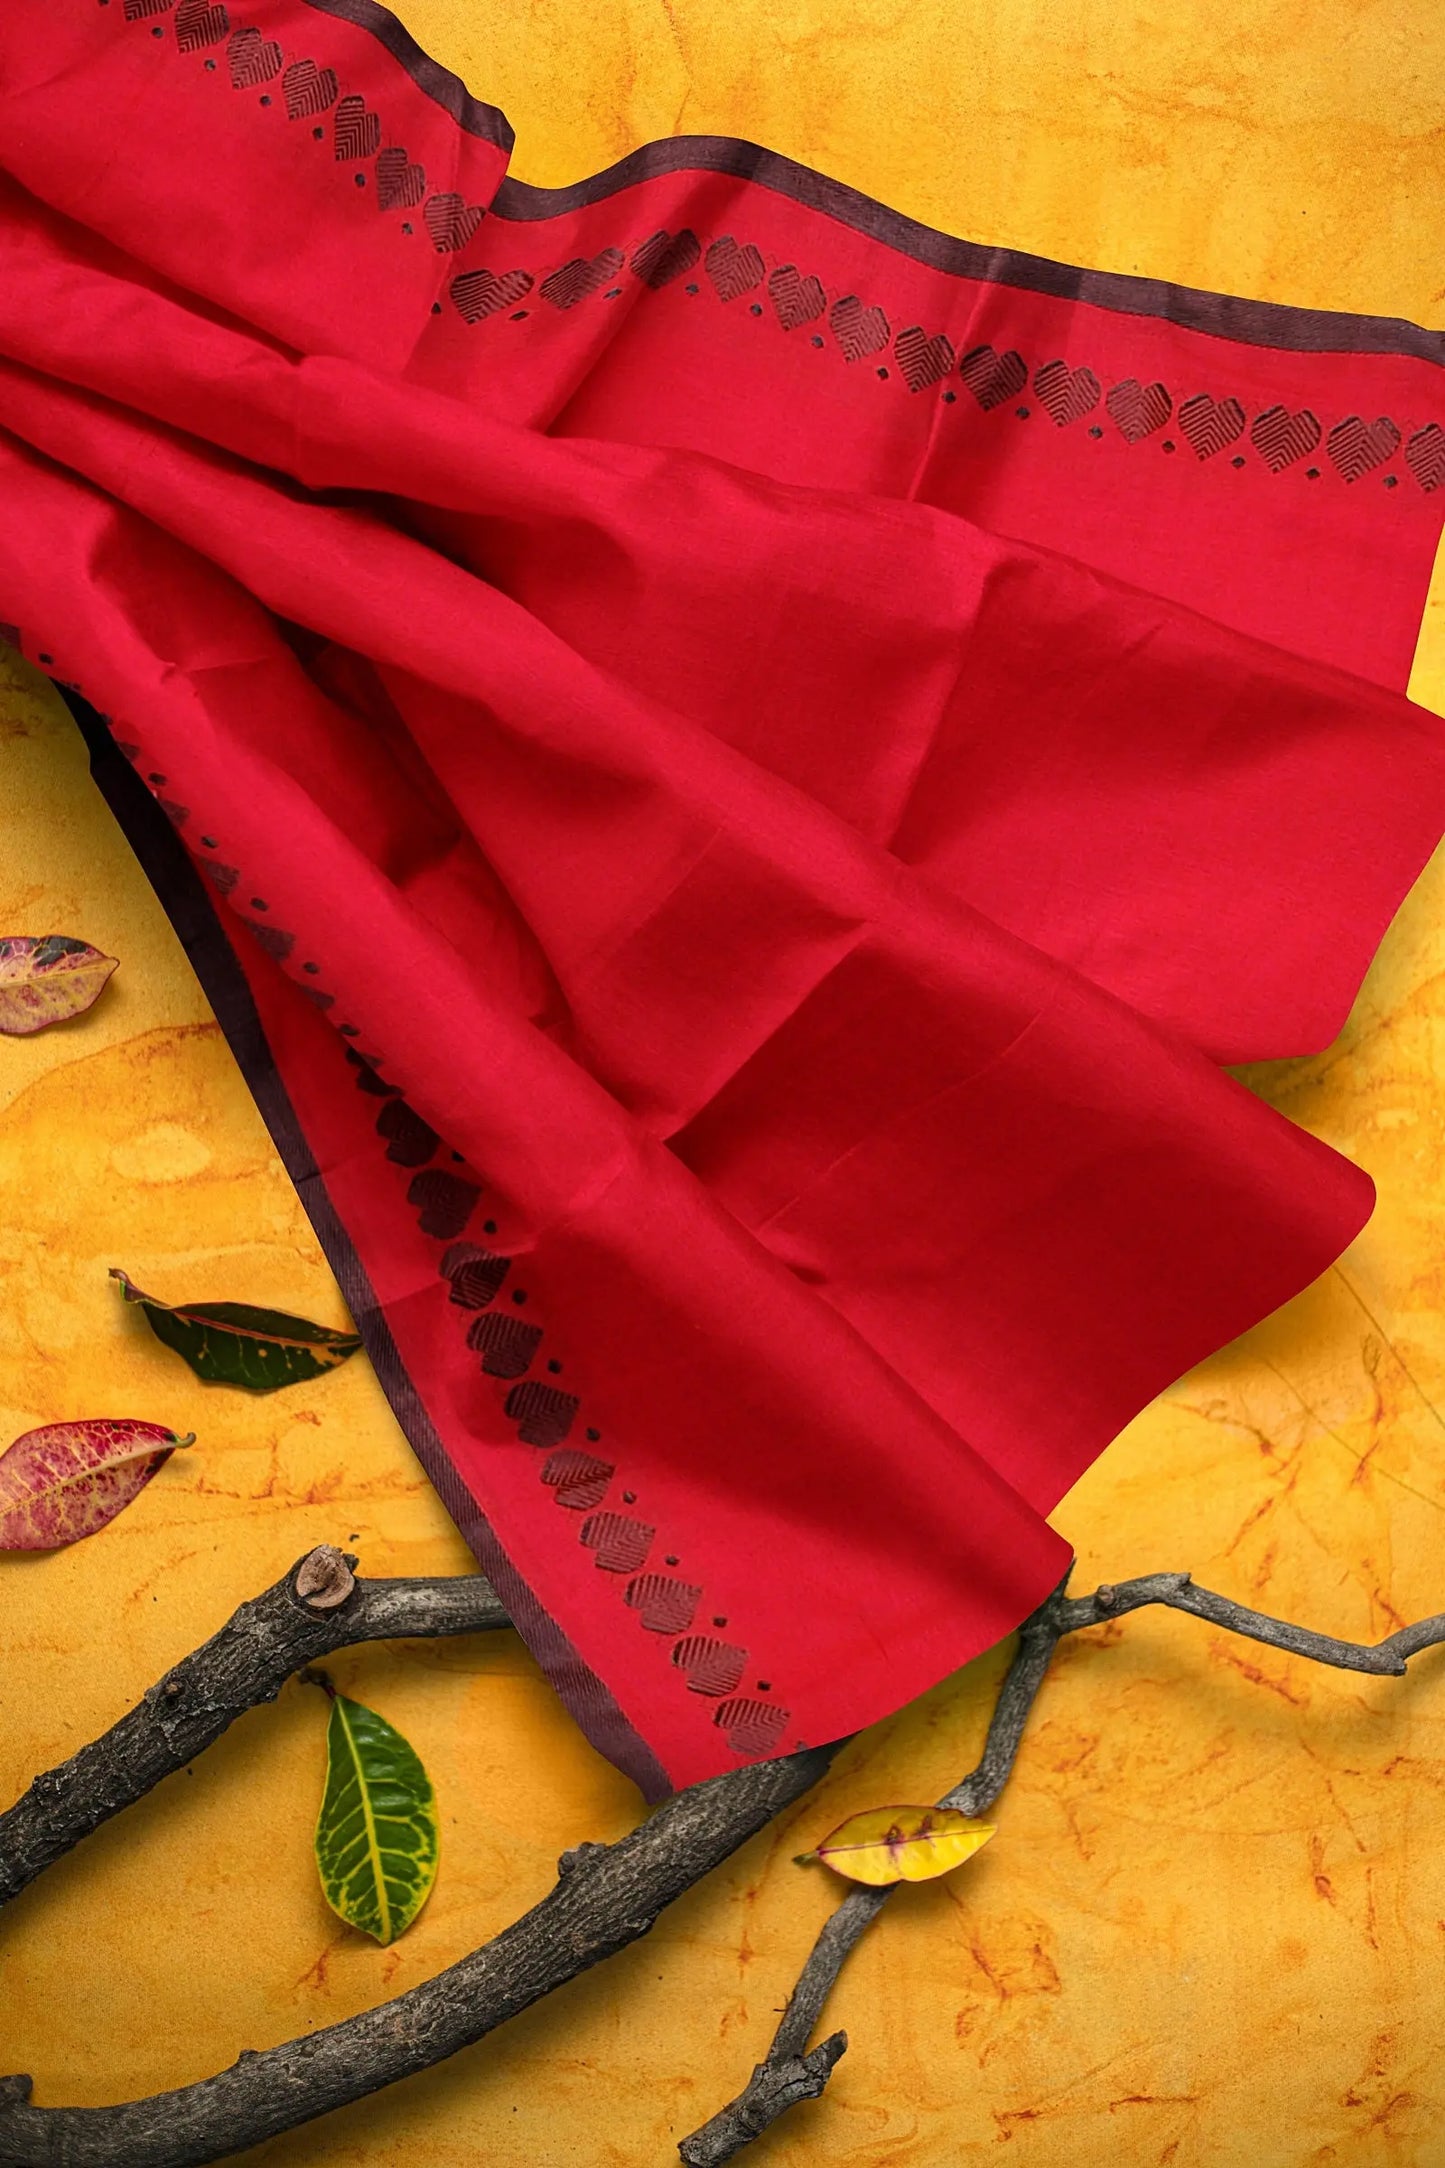 A red khadi cotton saree with a traditional love weaving pattern on the border. The saree is made of 100% cotton. Putul's fashion